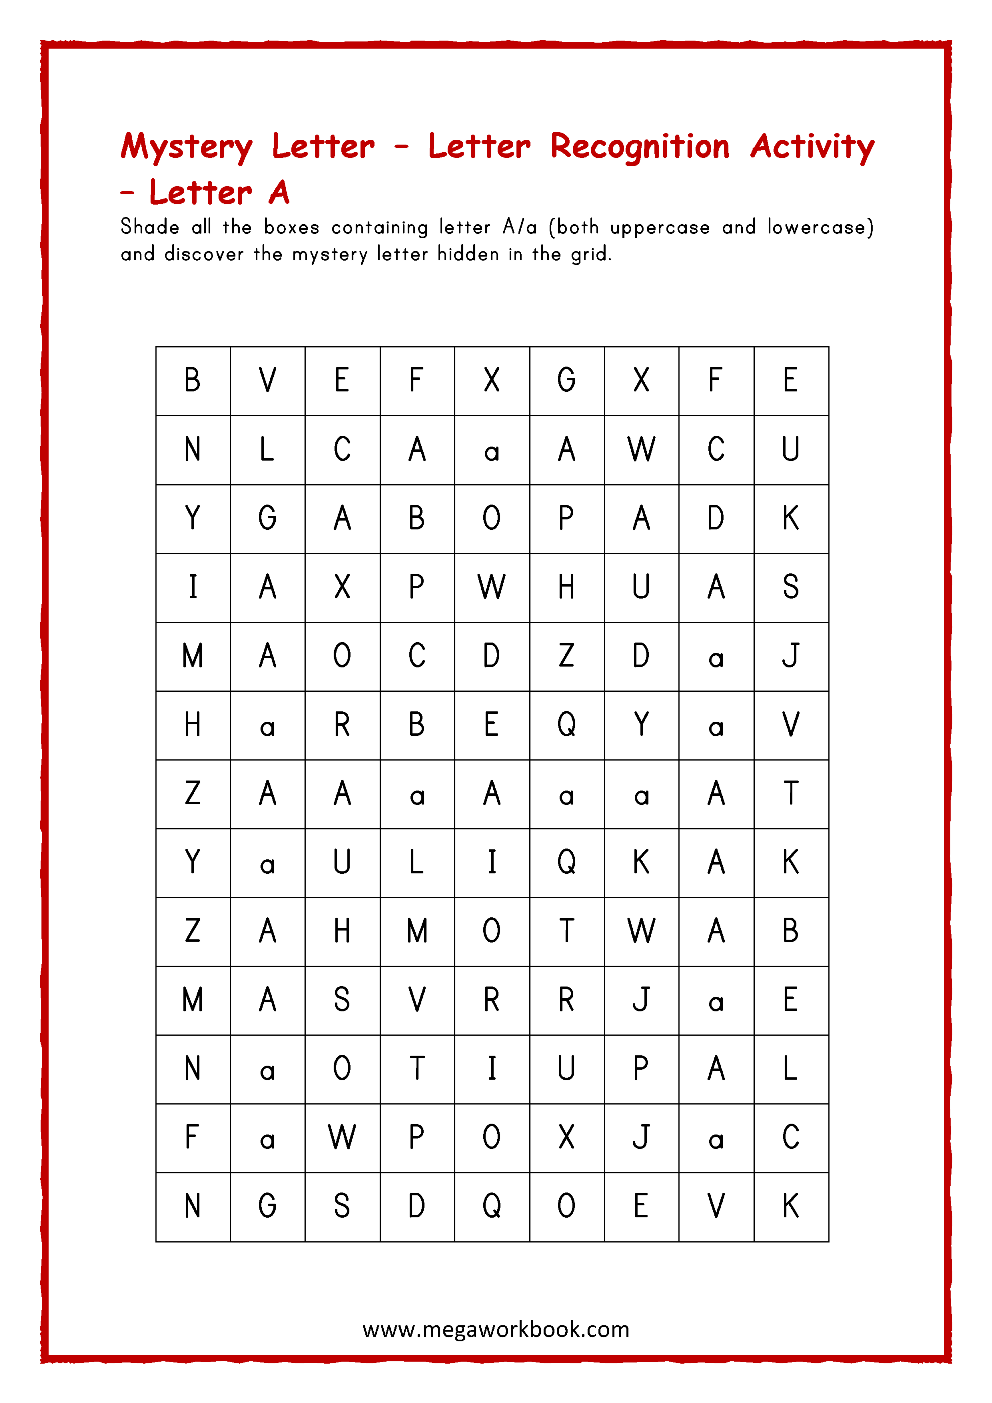 Letter A Activities - Letter A Worksheets - Letter A Activity